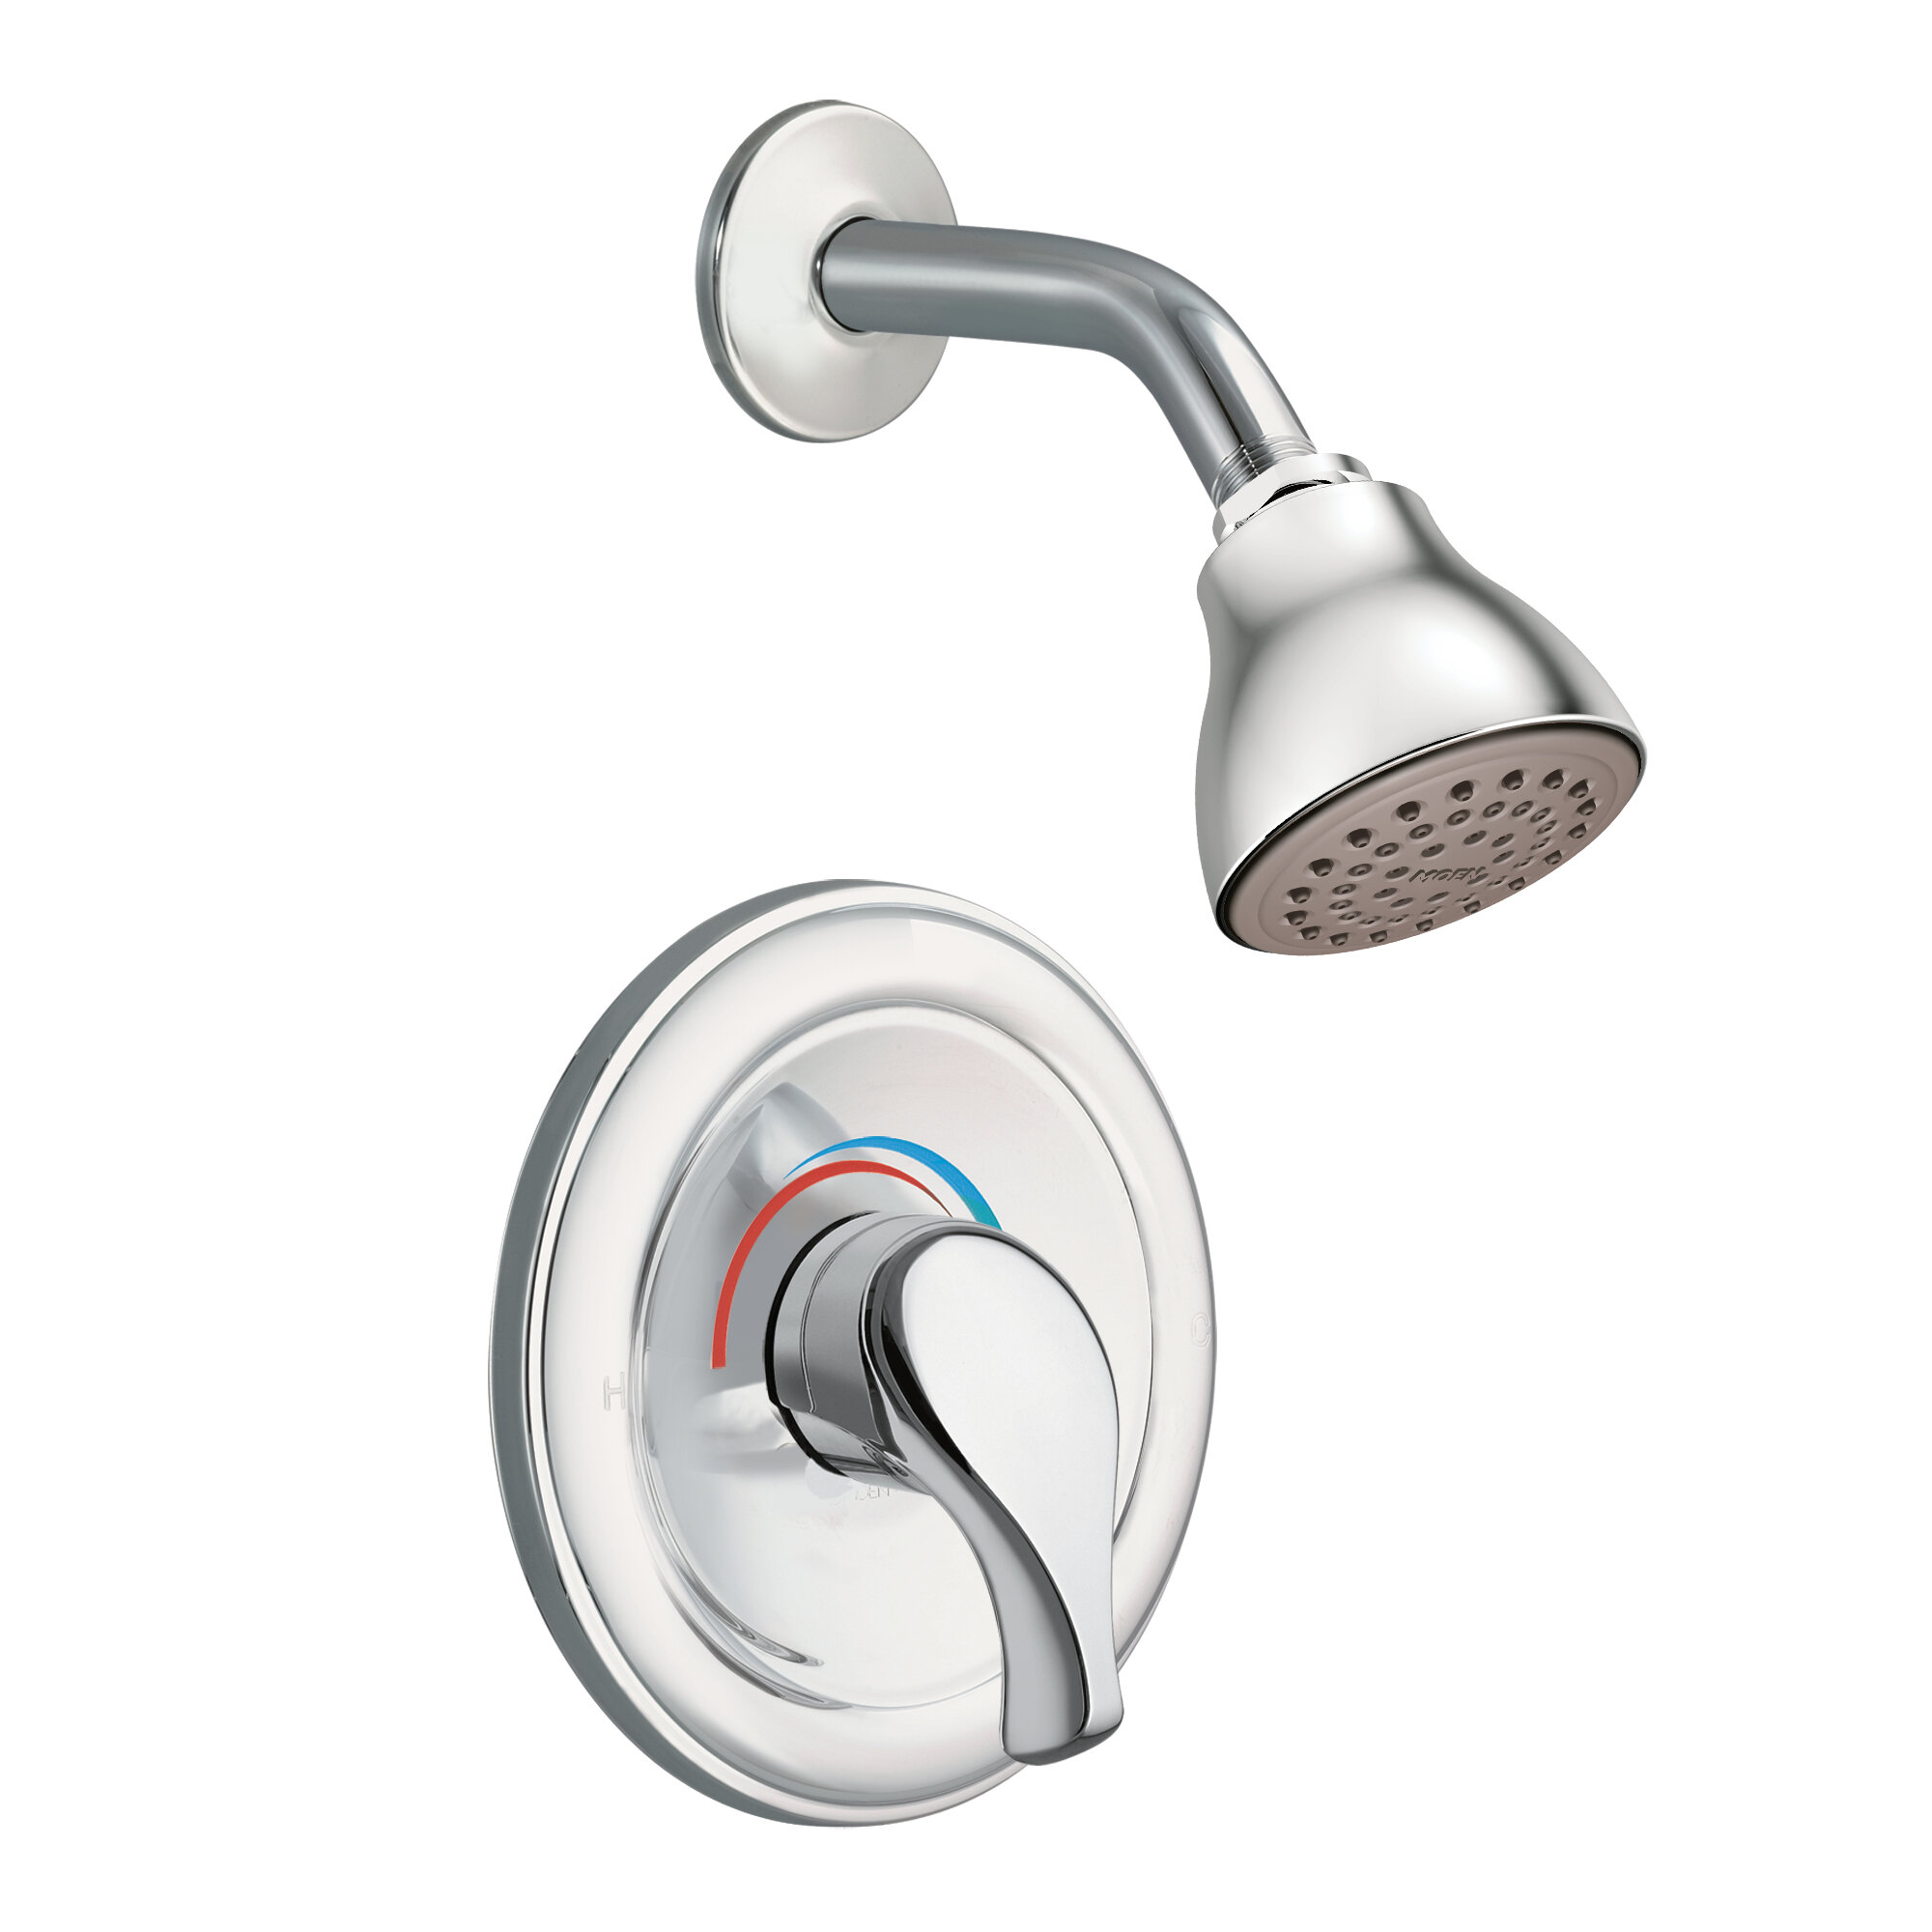 Tl171 Moen Legend Shower Faucet Trim With Lever Handle And